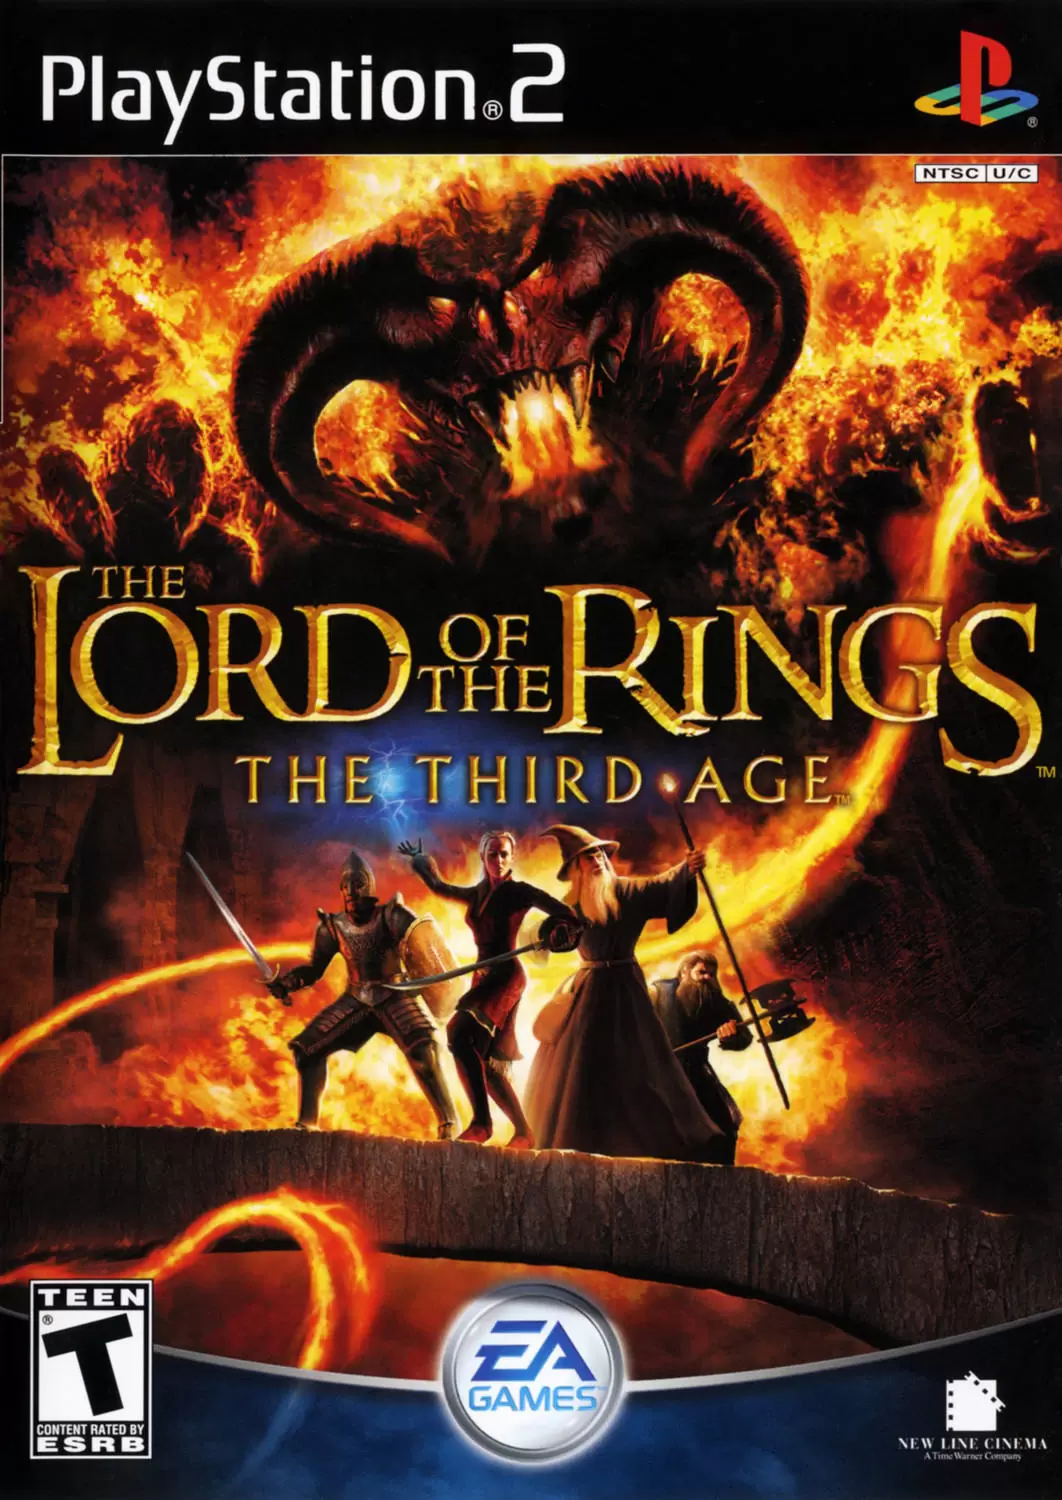 PS2 Games - The Lord of the Rings: The Third Age